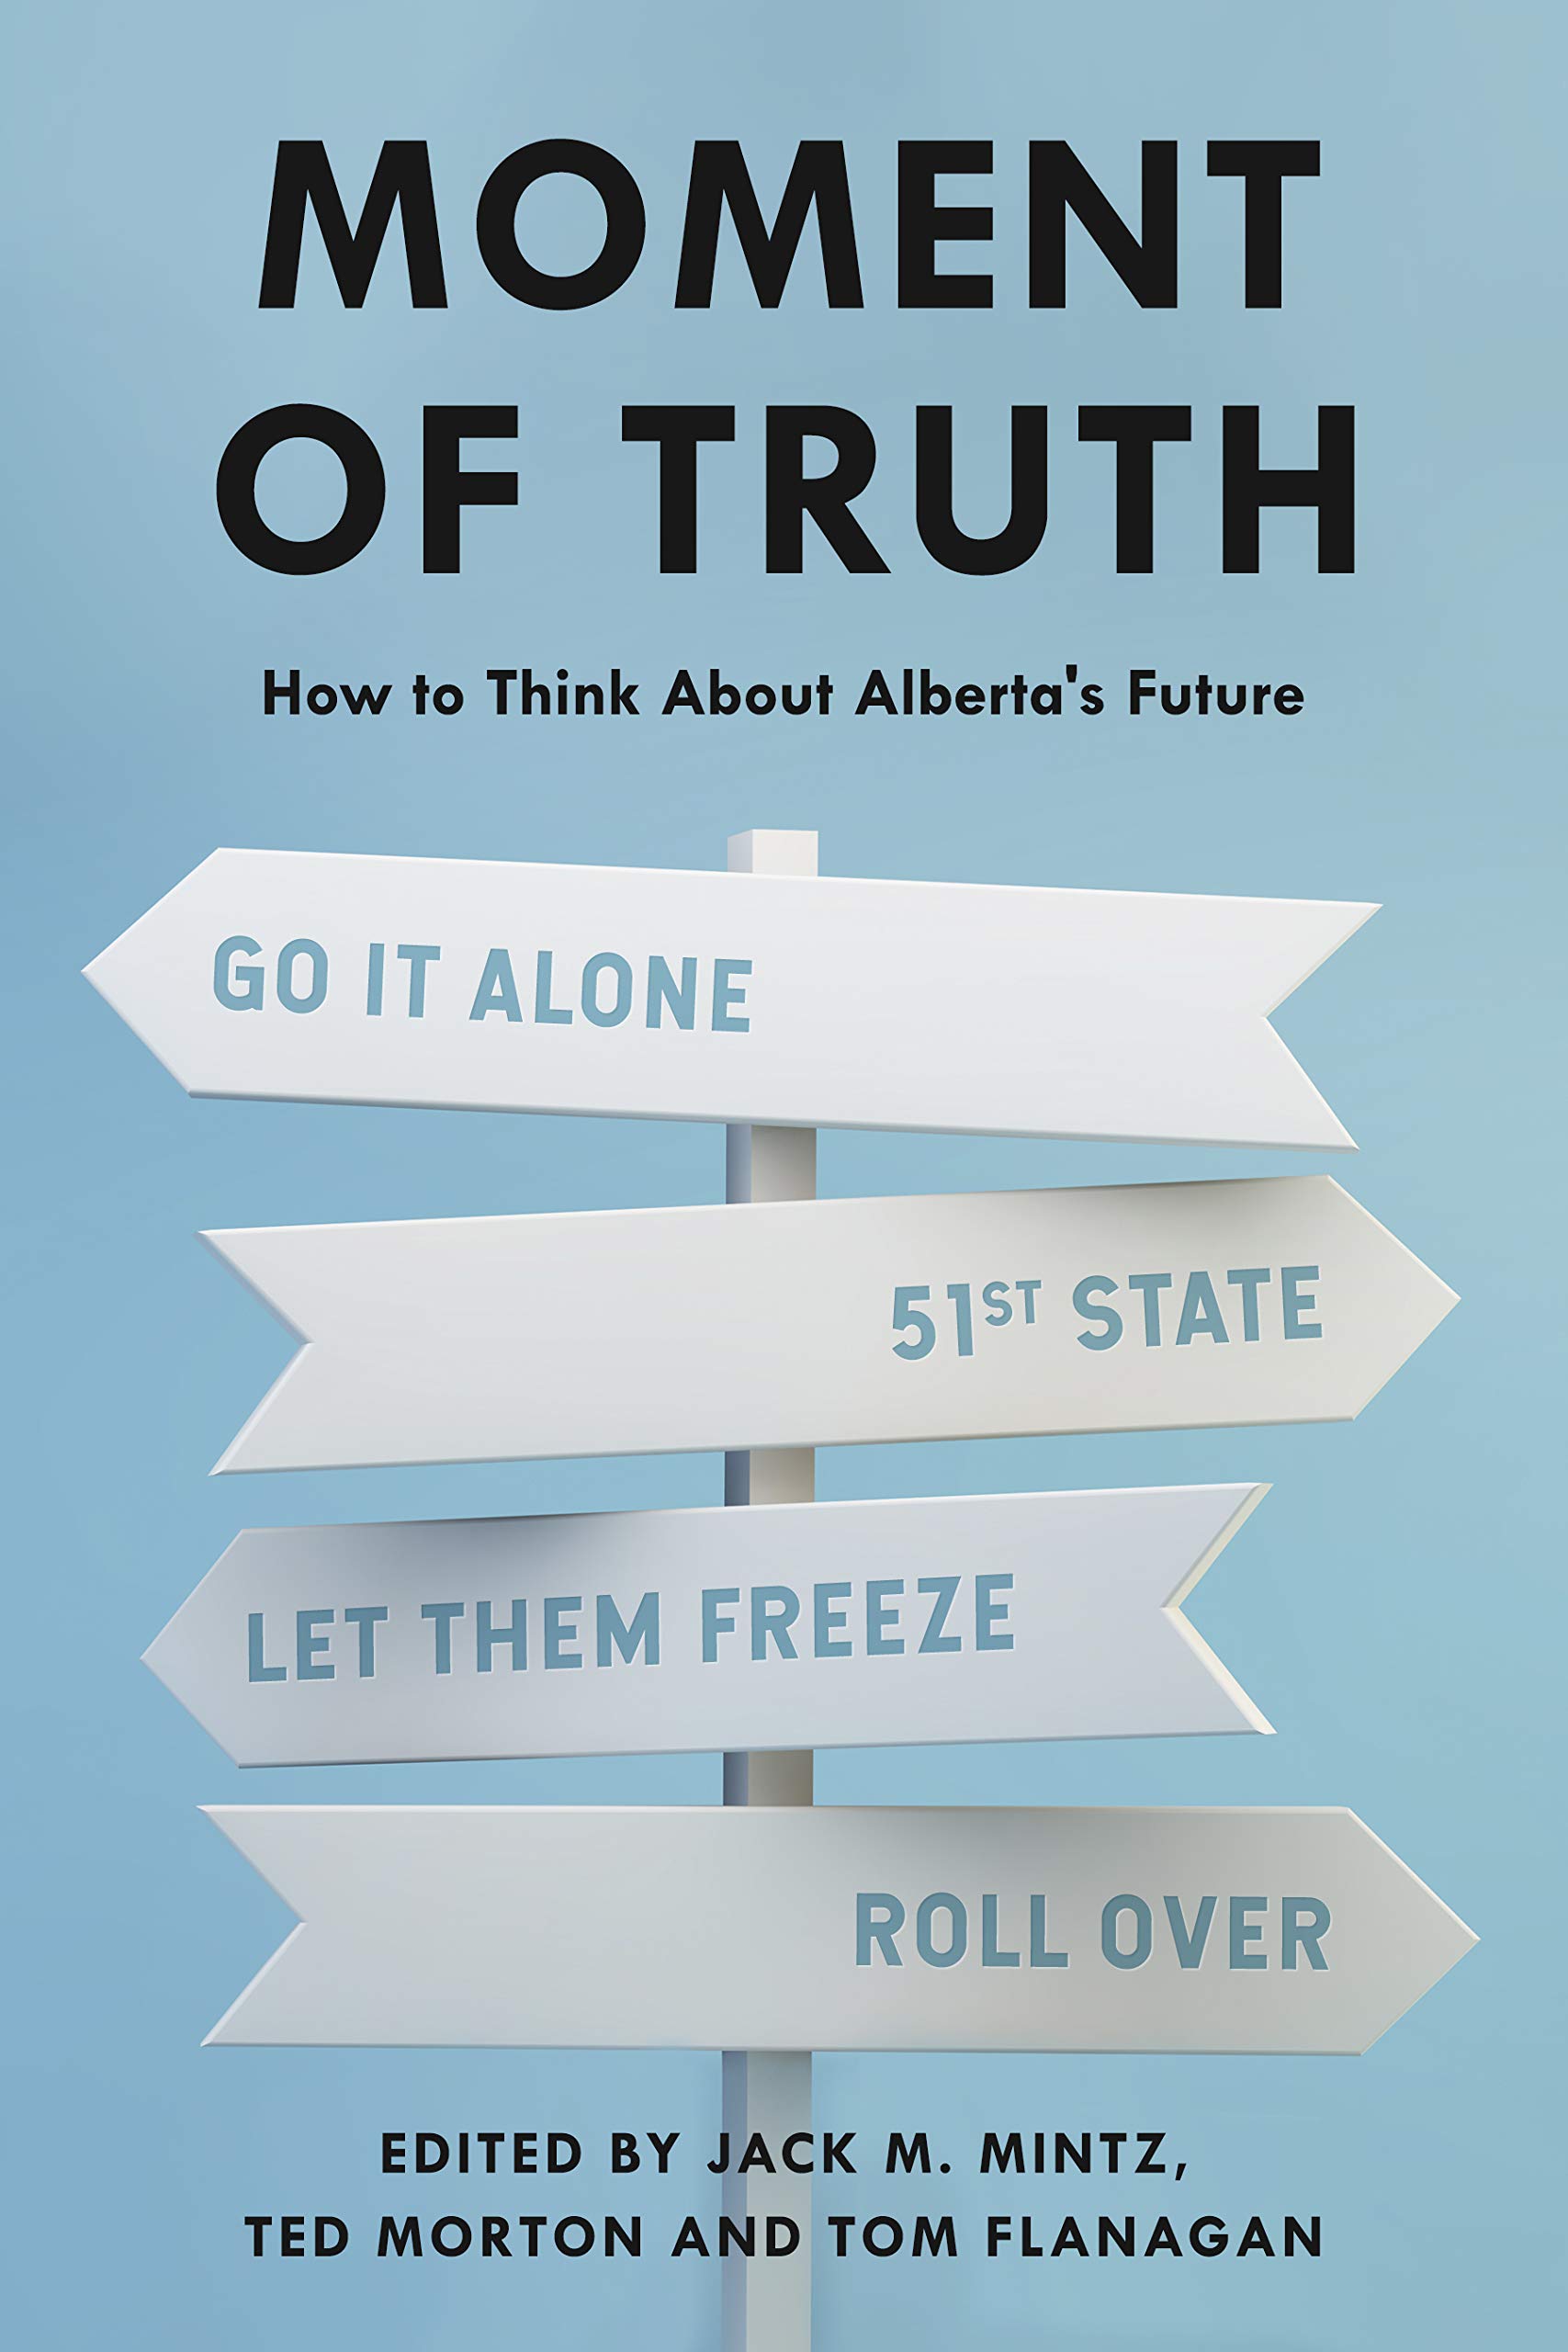 moment-of-truth-book-review-and-opinion-ab-pol-econ